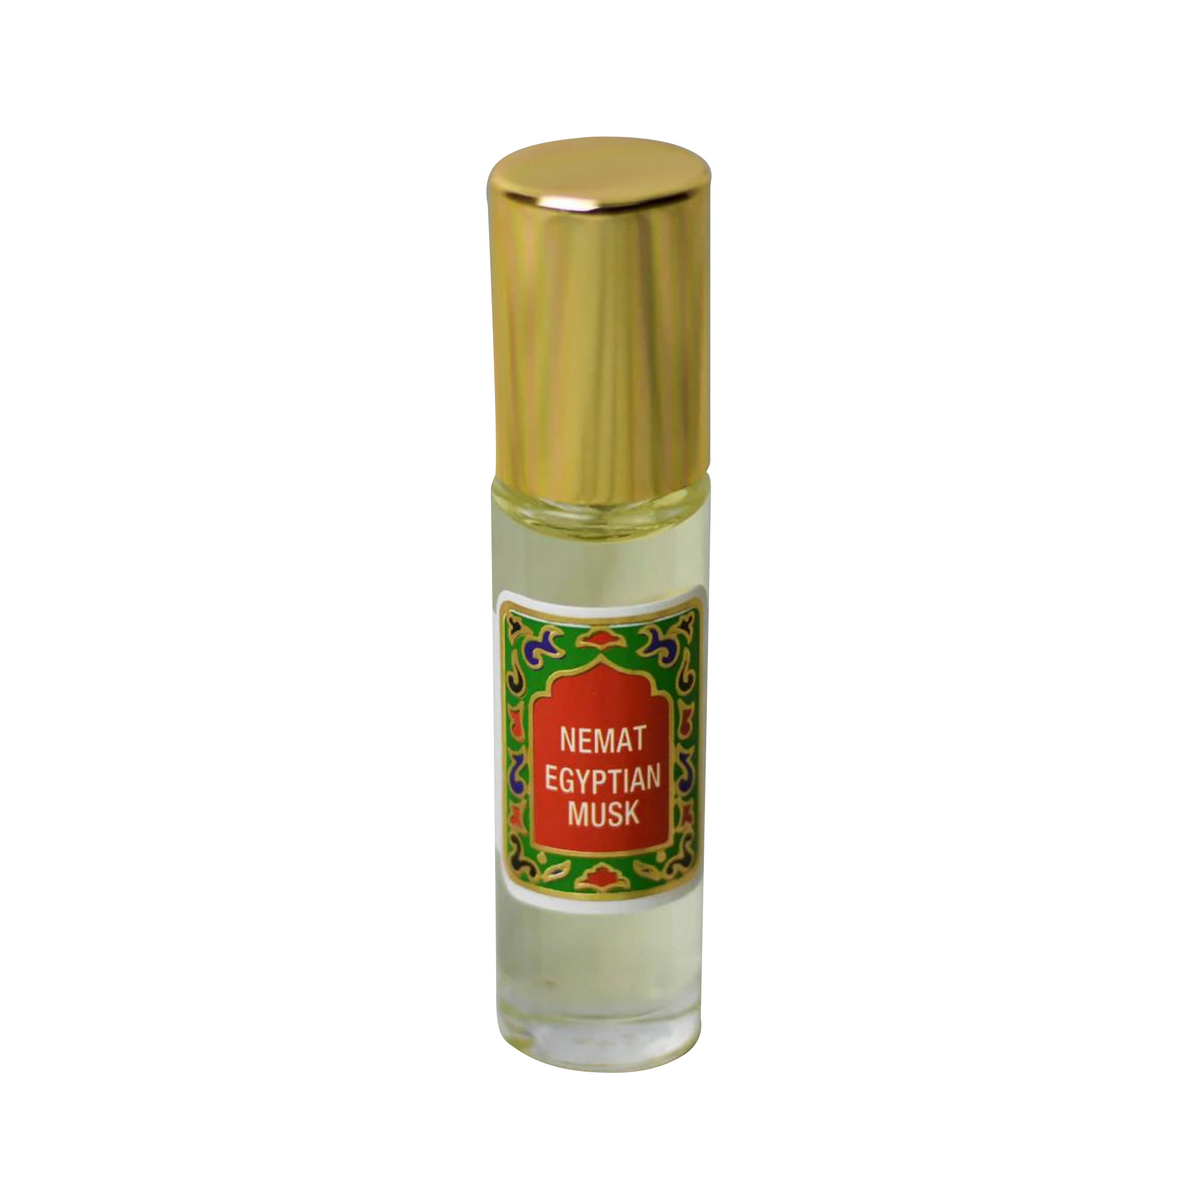 Primary image of Egyptian Musk Fragrance Roll-On